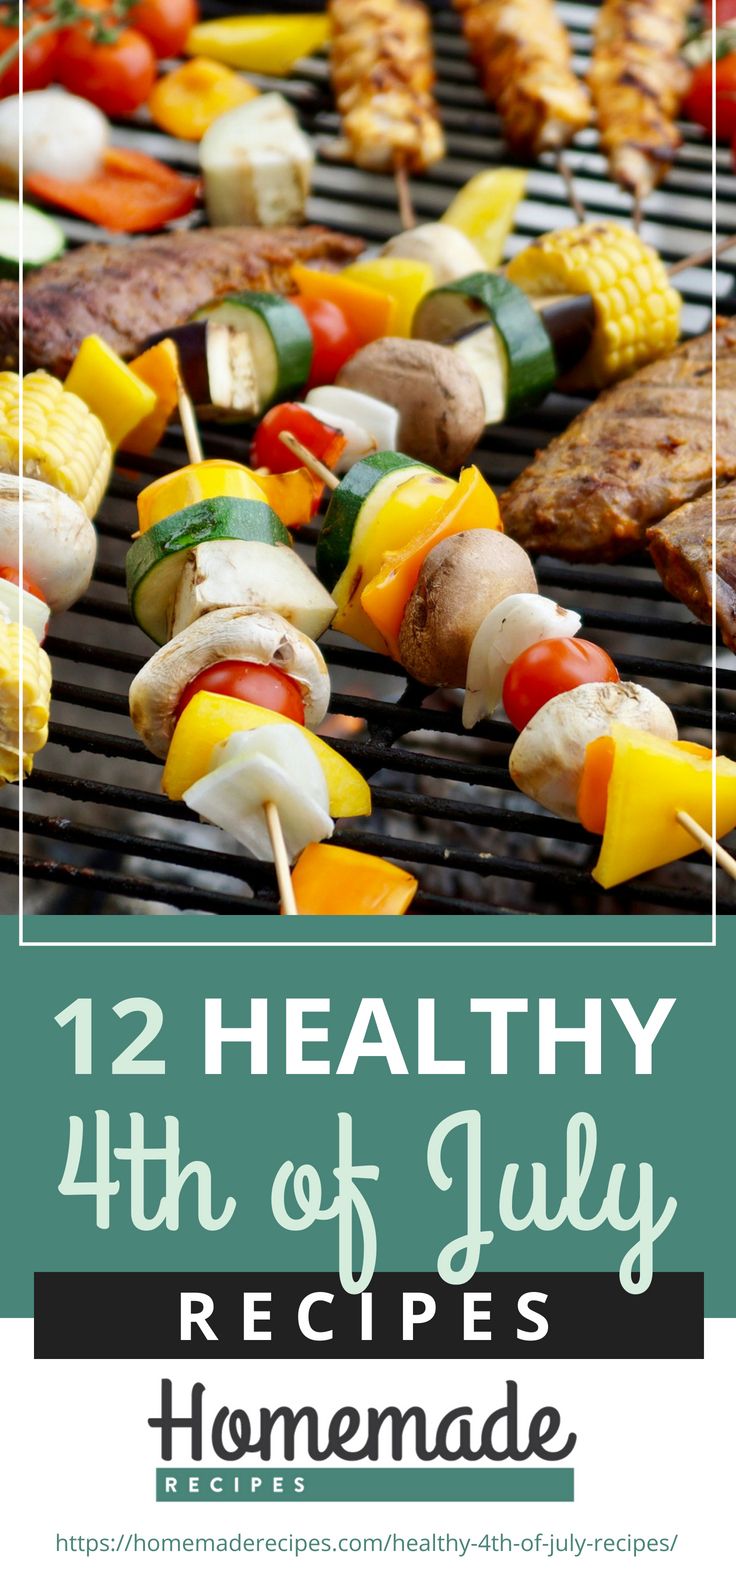 Pinterest Placard | 12 Healthy 4th Of July Recipes | Homemade Recipes | clean eating 4th of july recipes